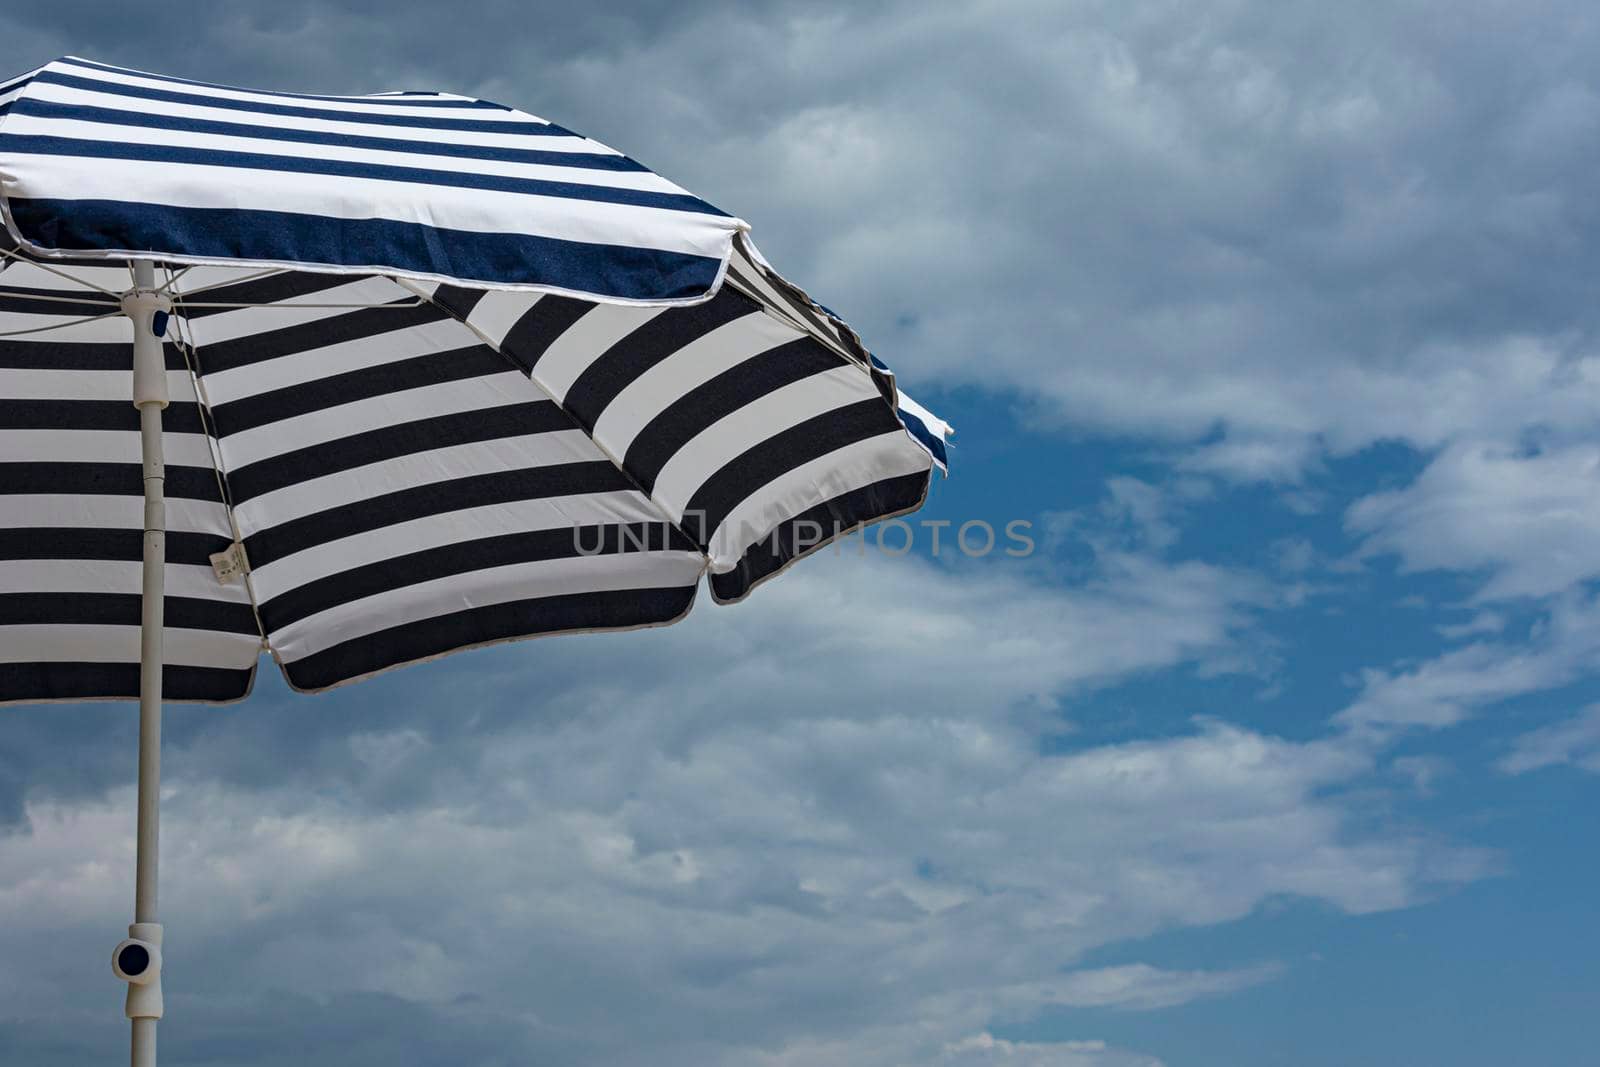 Beach umbrella from the sun on the background of blue sky with cirrus clouds. Stock photo.